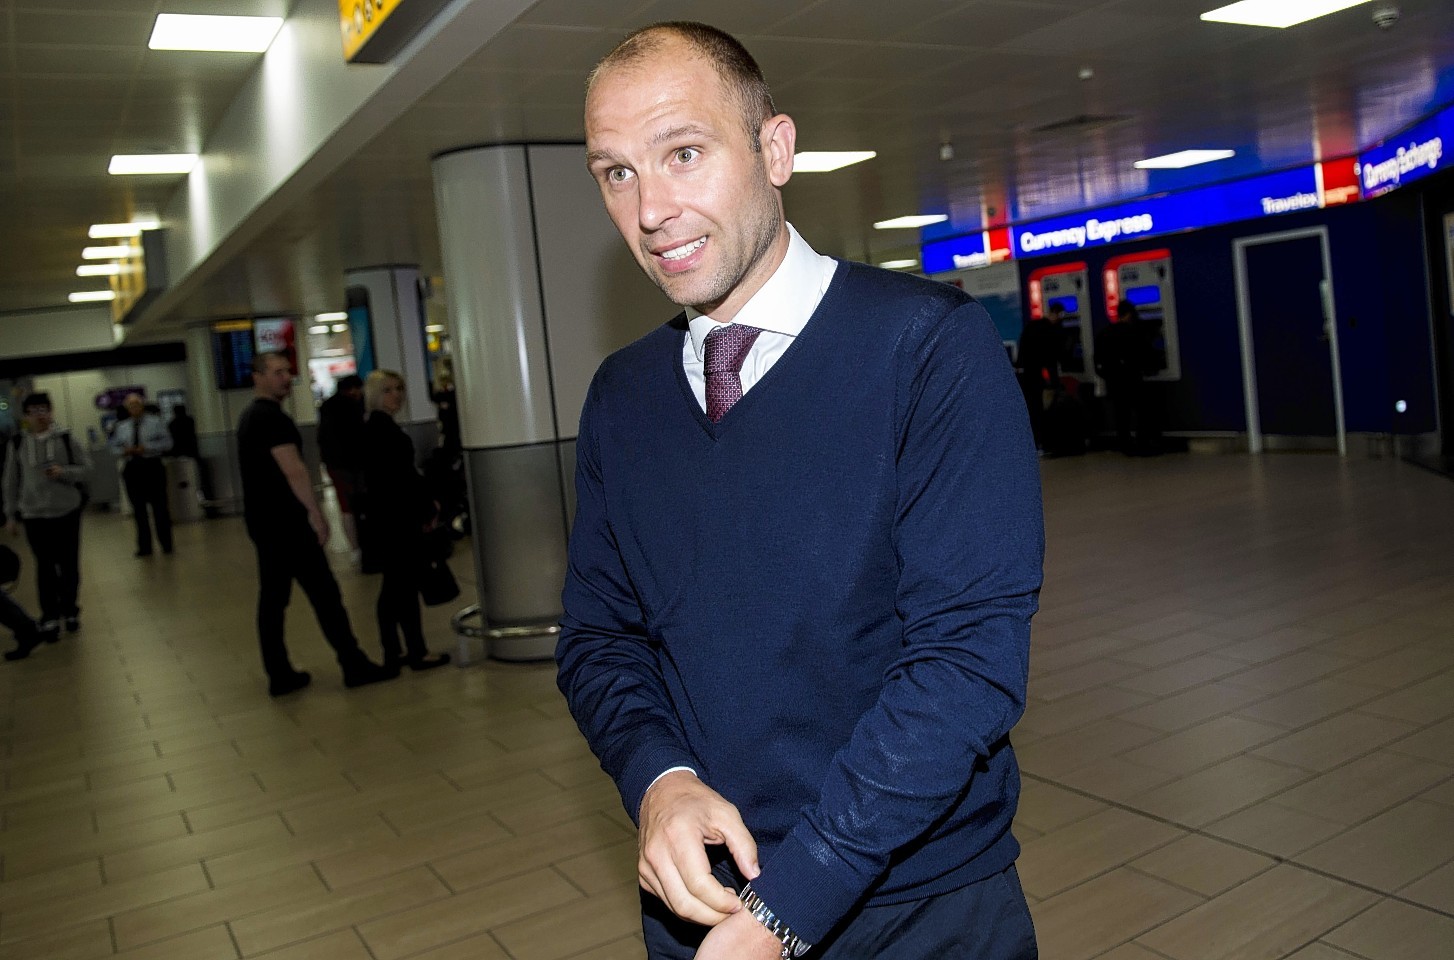 Former Derby player John Eustace has returned to Glasgow for more talks with Rangers